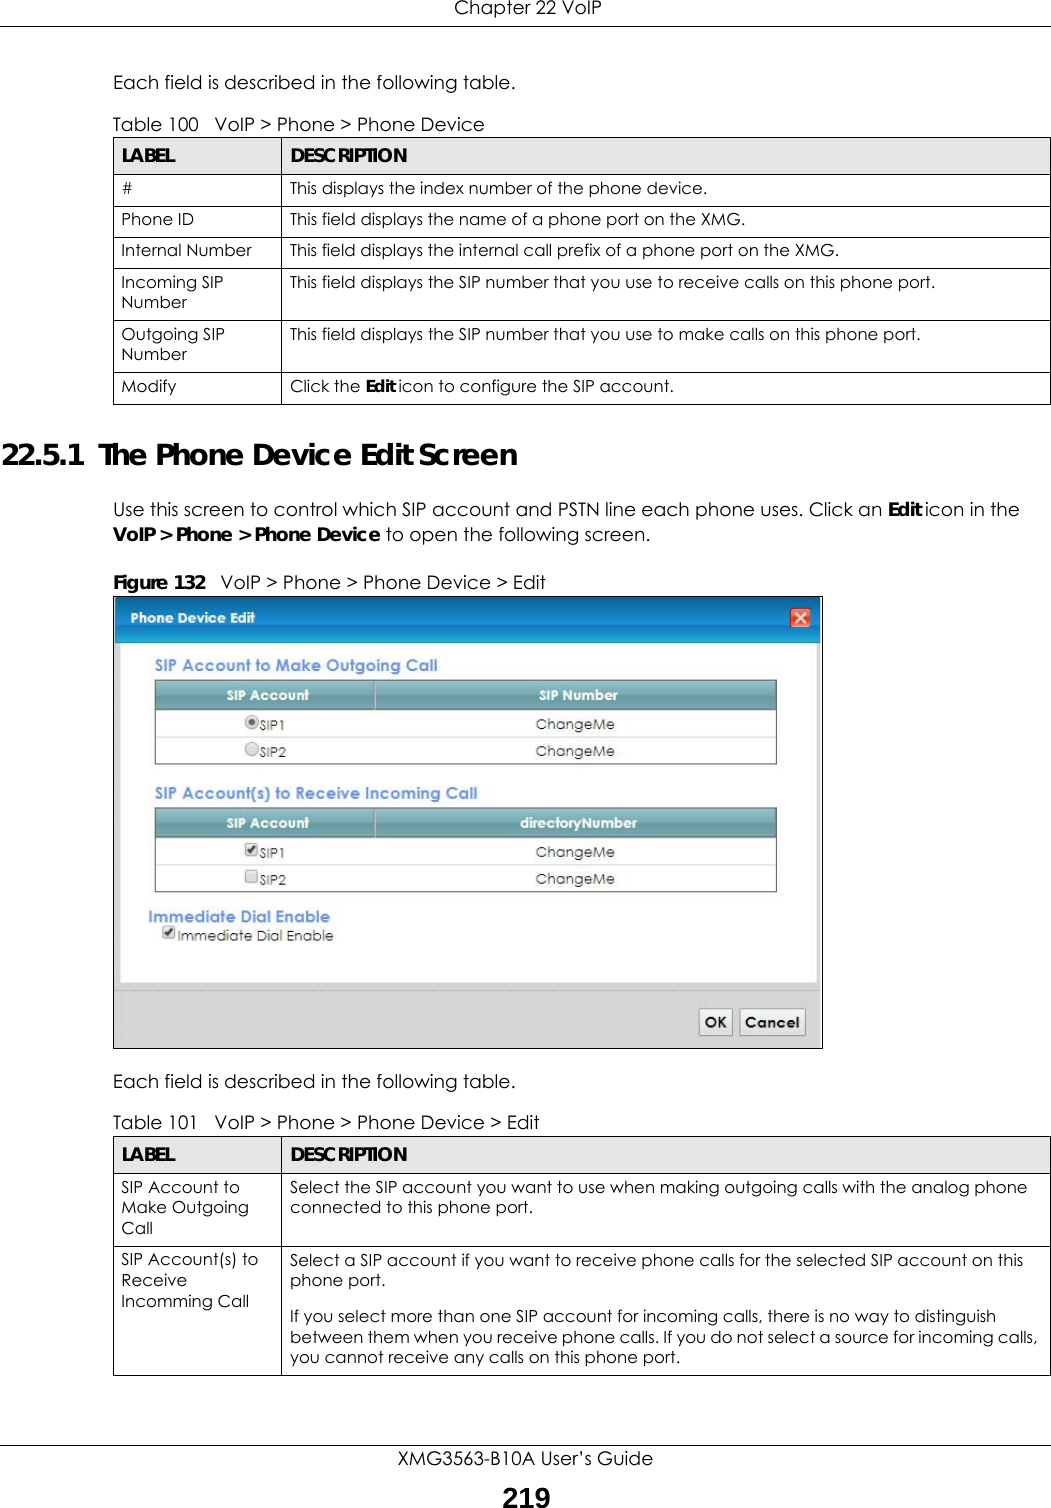  Chapter 22 VoIPXMG3563-B10A User’s Guide219Each field is described in the following table.22.5.1  The Phone Device Edit Screen Use this screen to control which SIP account and PSTN line each phone uses. Click an Edit icon in the VoIP &gt; Phone &gt; Phone Device to open the following screen. Figure 132   VoIP &gt; Phone &gt; Phone Device &gt; Edit Each field is described in the following table.Table 100   VoIP &gt; Phone &gt; Phone DeviceLABEL DESCRIPTION#This displays the index number of the phone device.Phone ID This field displays the name of a phone port on the XMG.Internal Number This field displays the internal call prefix of a phone port on the XMG. Incoming SIP NumberThis field displays the SIP number that you use to receive calls on this phone port.Outgoing SIP NumberThis field displays the SIP number that you use to make calls on this phone port.Modify Click the Edit icon to configure the SIP account.Table 101   VoIP &gt; Phone &gt; Phone Device &gt; EditLABEL DESCRIPTIONSIP Account to Make Outgoing CallSelect the SIP account you want to use when making outgoing calls with the analog phone connected to this phone port.SIP Account(s) to Receive Incomming CallSelect a SIP account if you want to receive phone calls for the selected SIP account on this phone port.If you select more than one SIP account for incoming calls, there is no way to distinguish between them when you receive phone calls. If you do not select a source for incoming calls, you cannot receive any calls on this phone port.